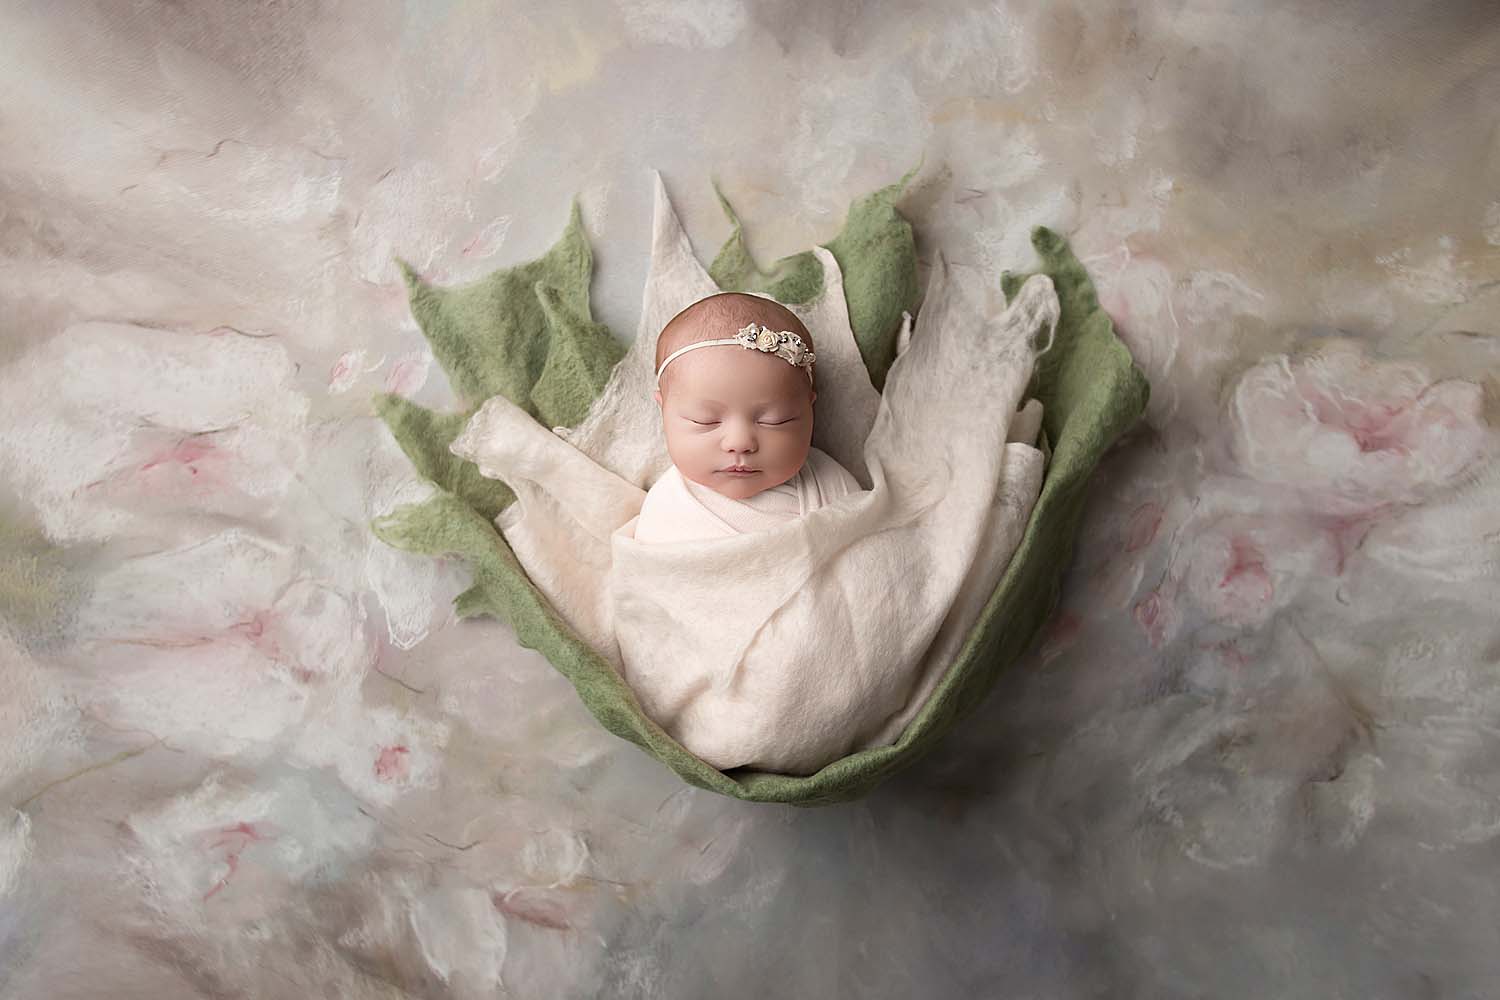 baby wrapped in a flower for newborn photography in weston, fl near ft. lauderdale, fl